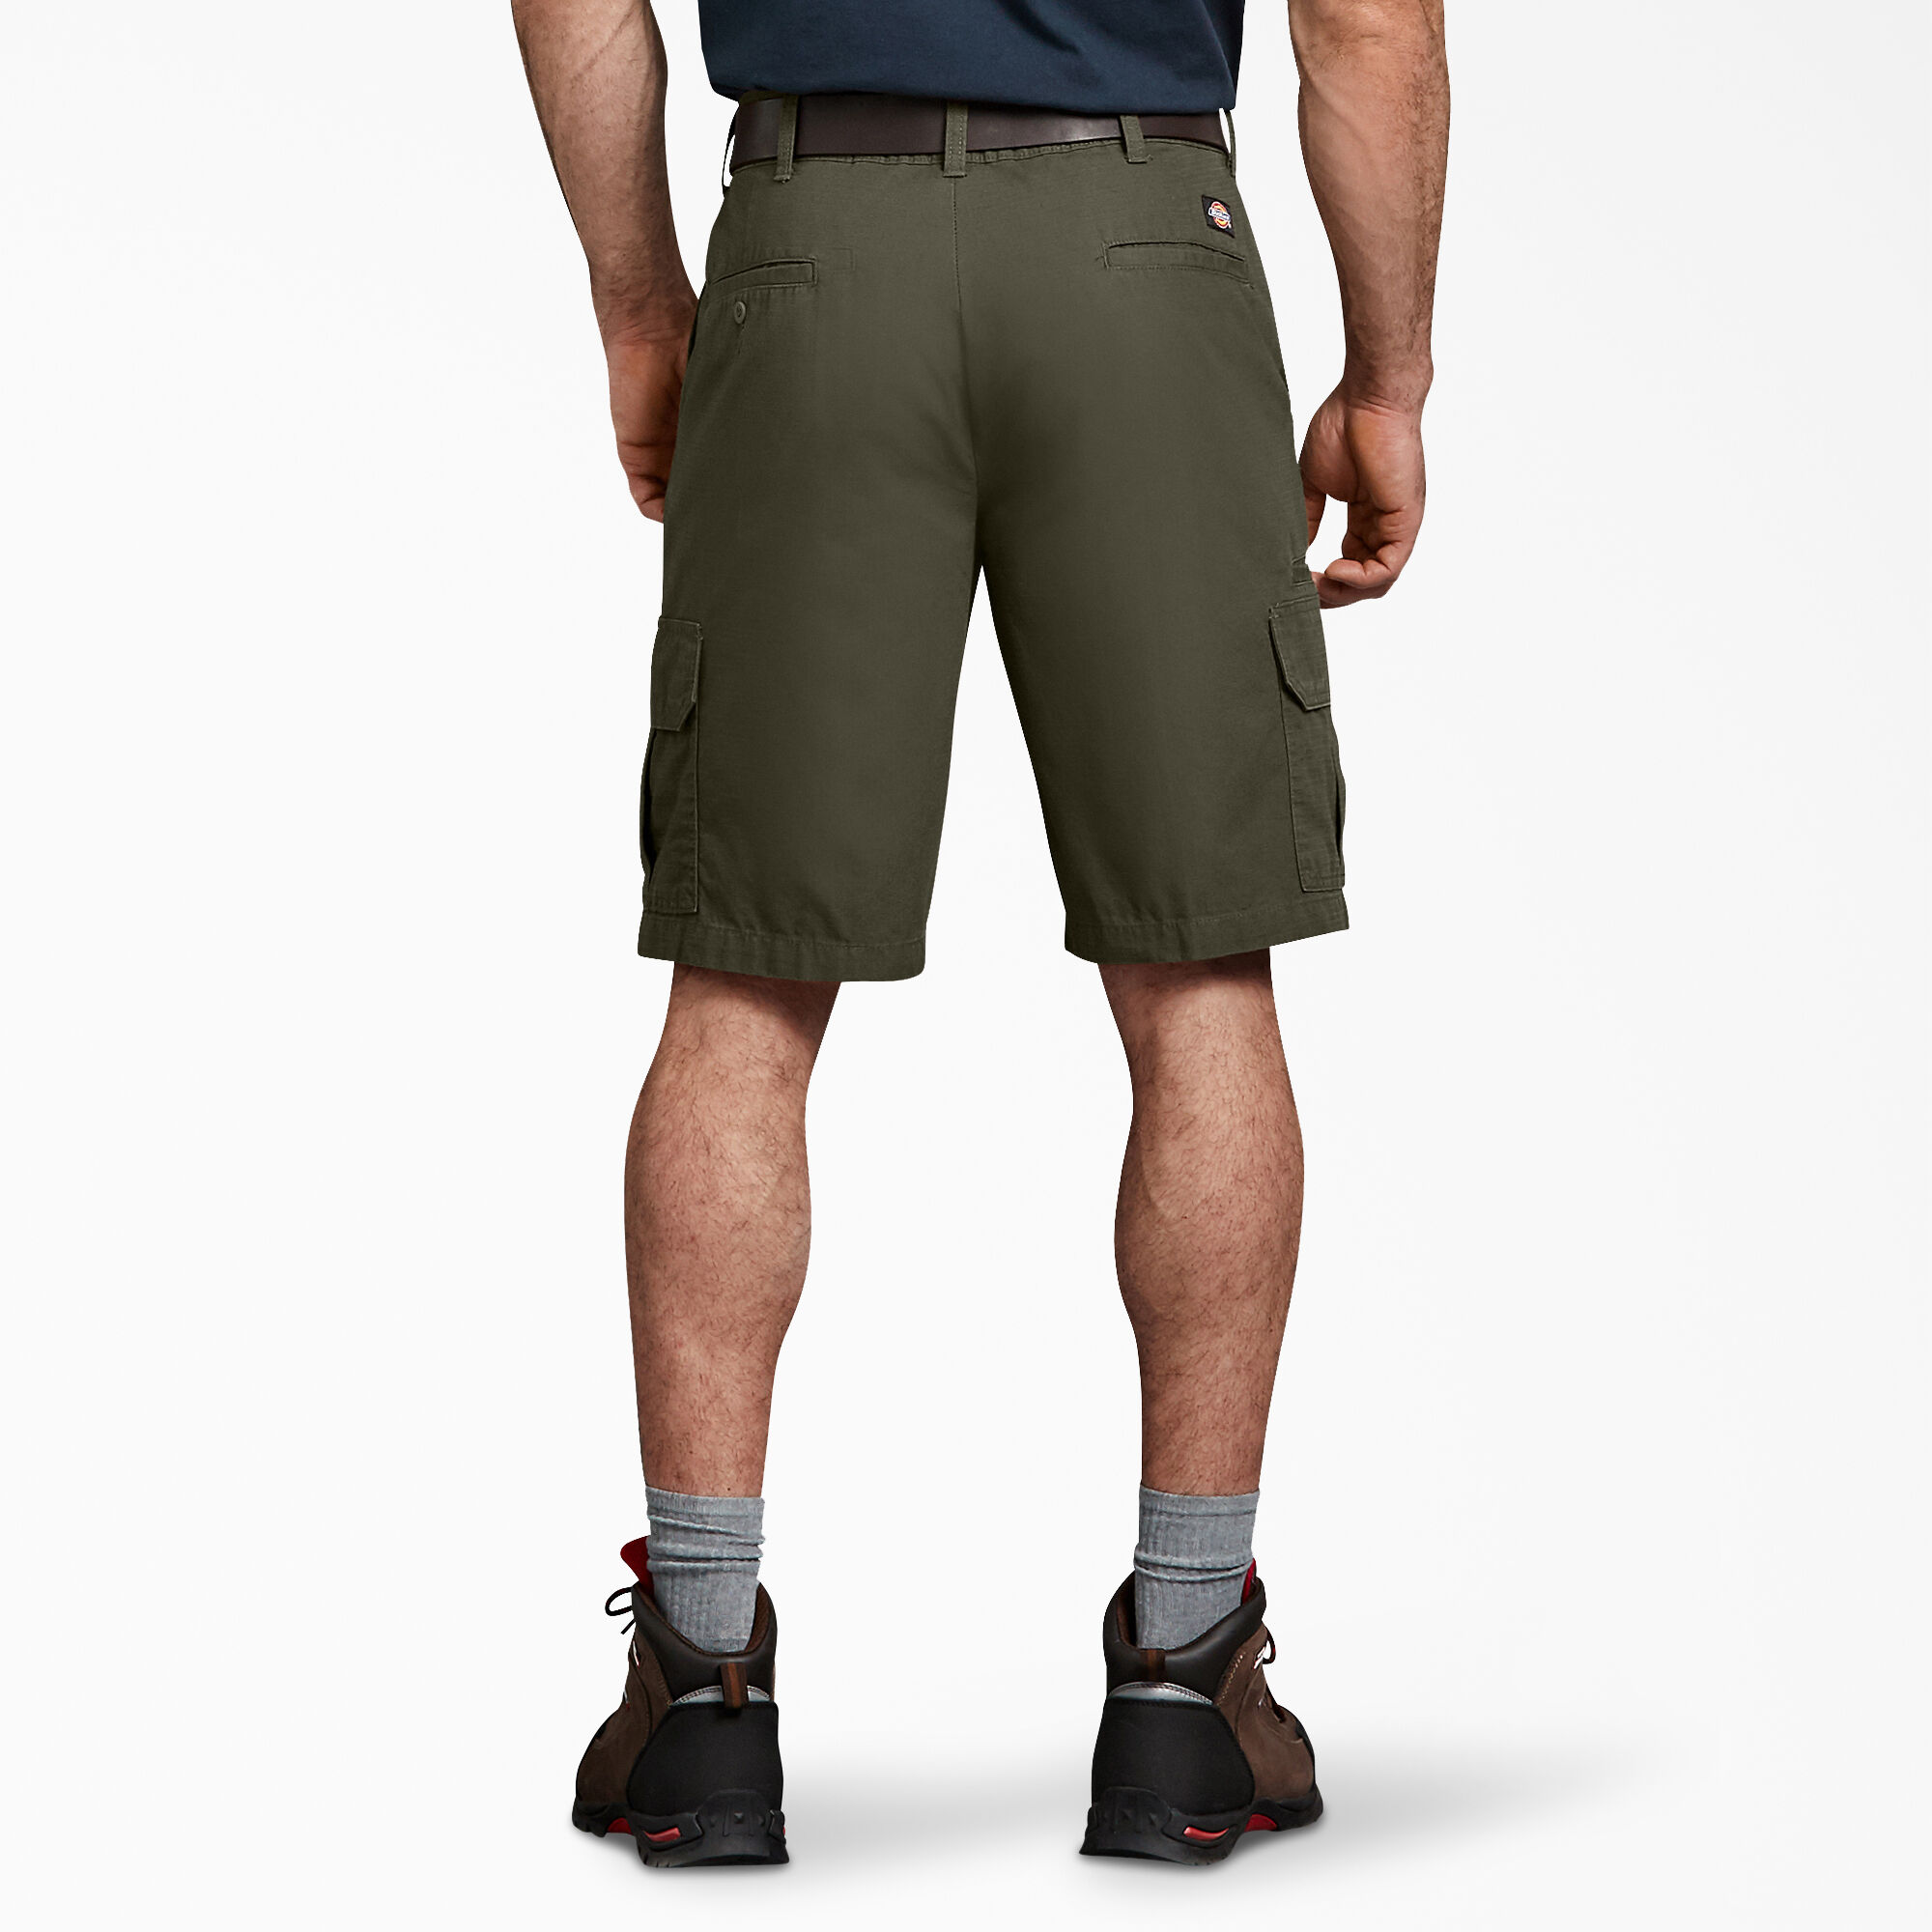 APTRO Mens Camo Cargo Shorts Cotton Lightweight Relaxed Fit Casual Shorts with Multi-Pockets 